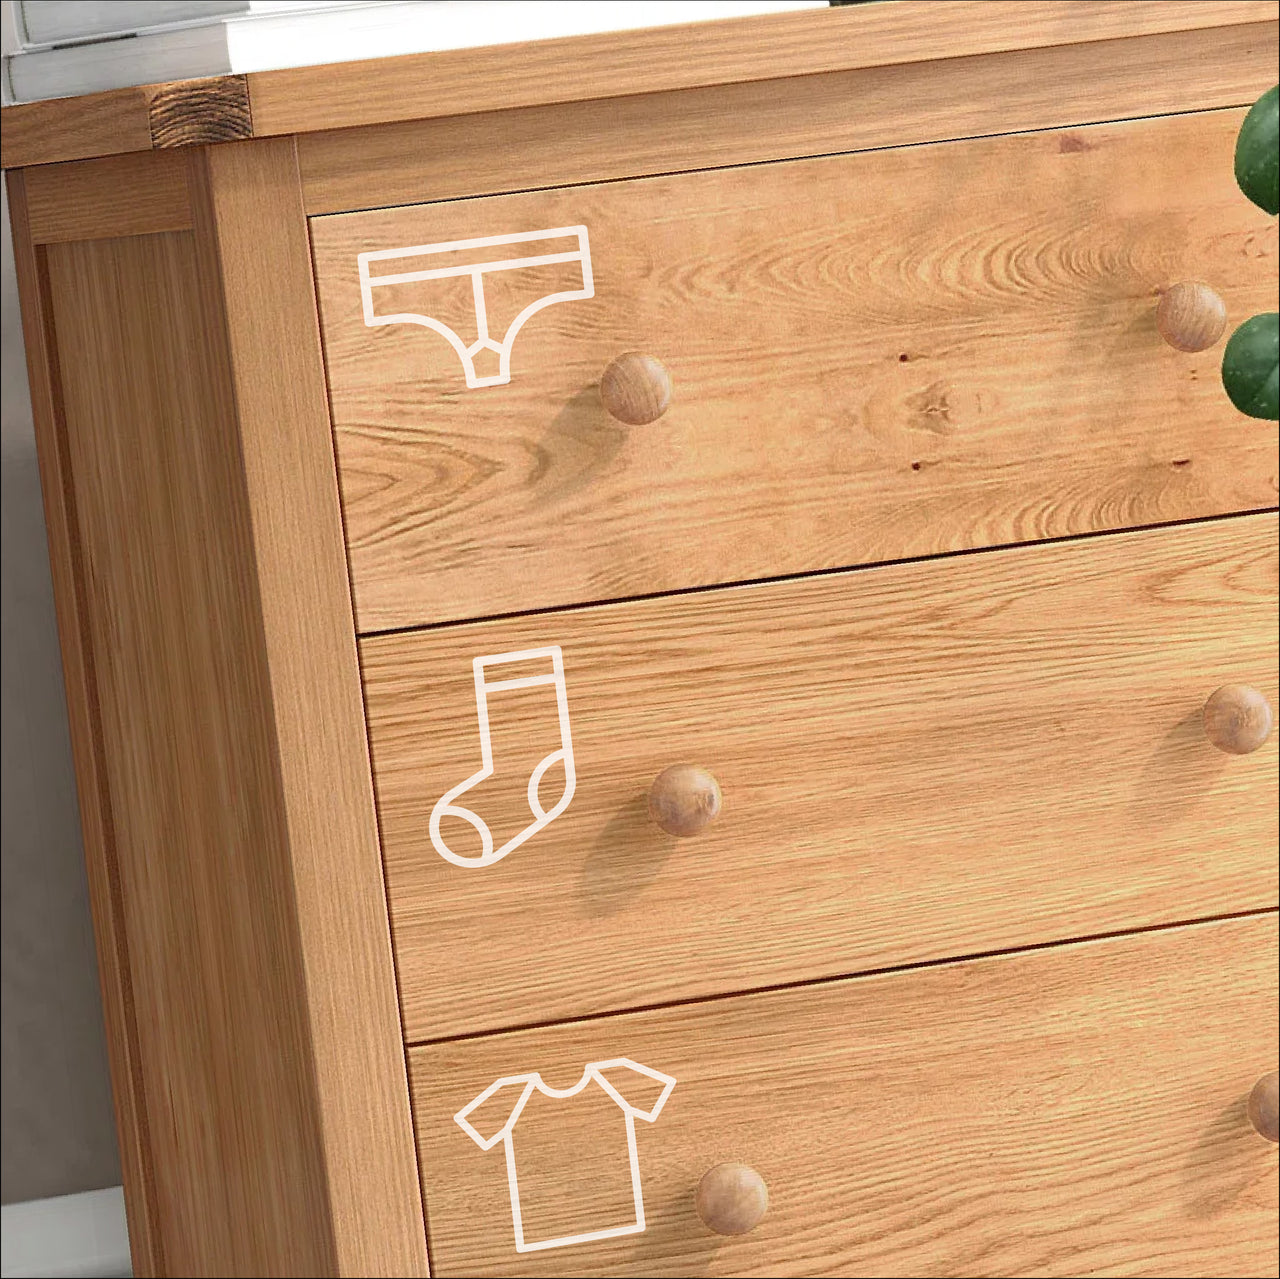 A wooden chest of drawers with white bedroom organisation decals stuck on them